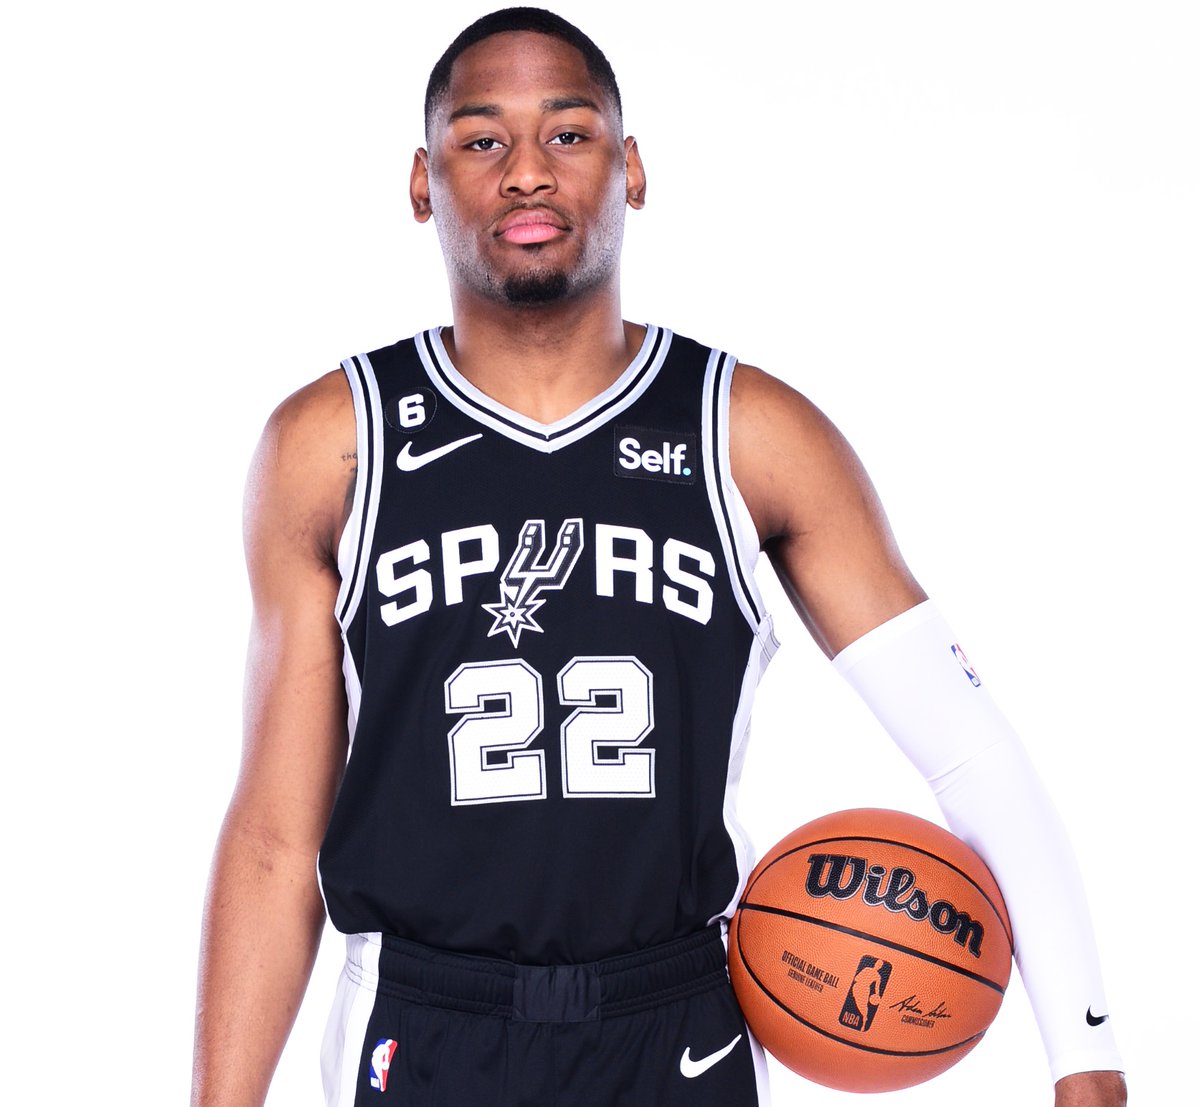 RT @NBA: Join us in wishing @MalakiBranham of the @spurs a HAPPY 20th BIRTHDAY! #NBABDAY https://t.co/kHsVAln9gq